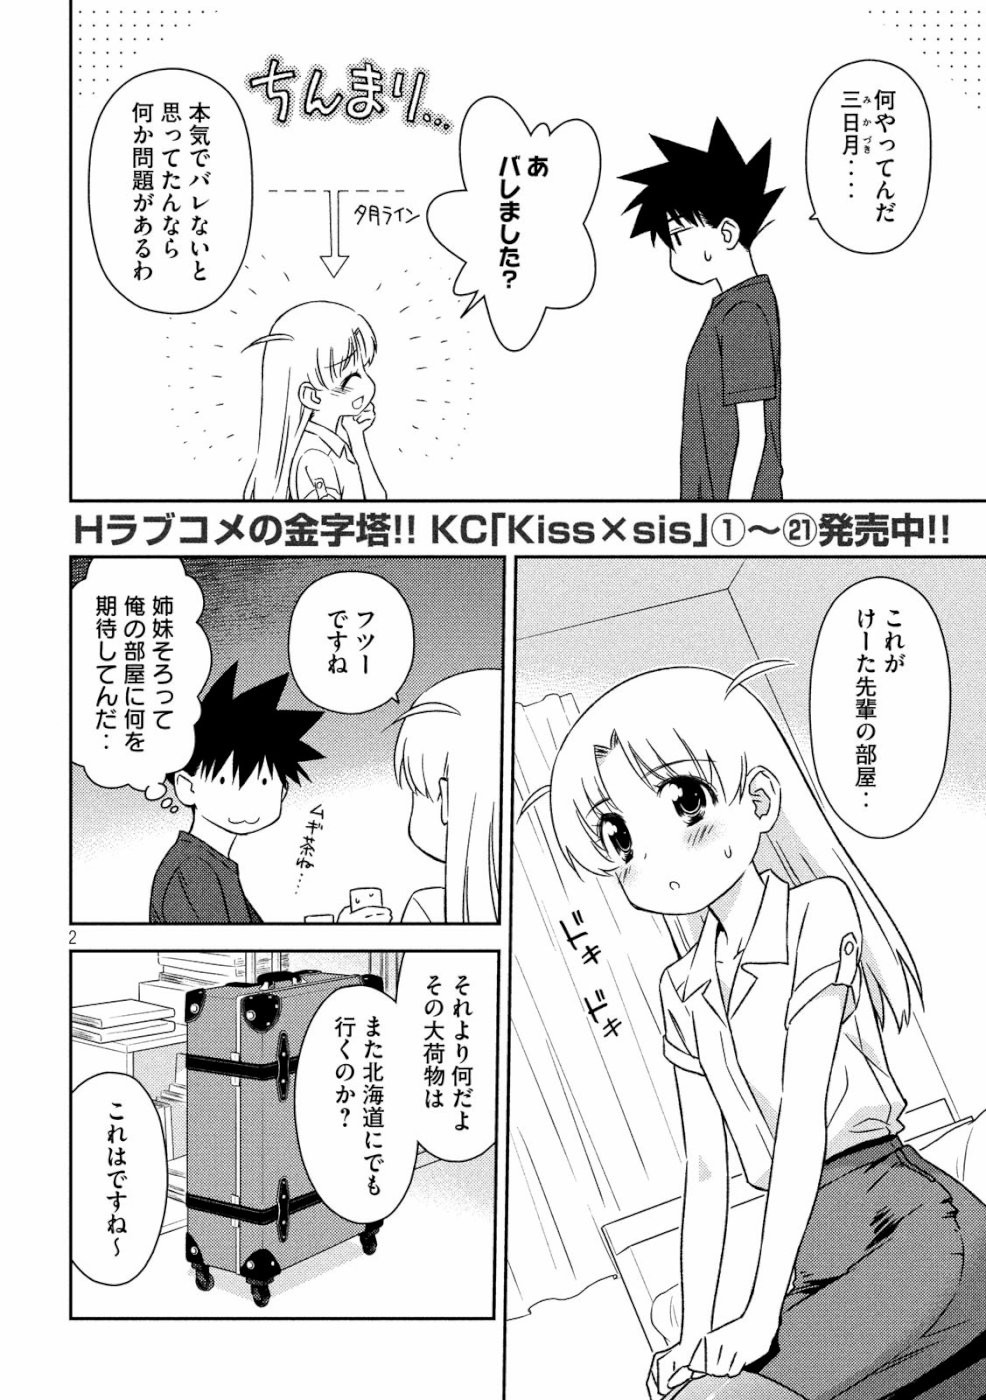 Kiss x Sis - Chapter 135 - Page 2